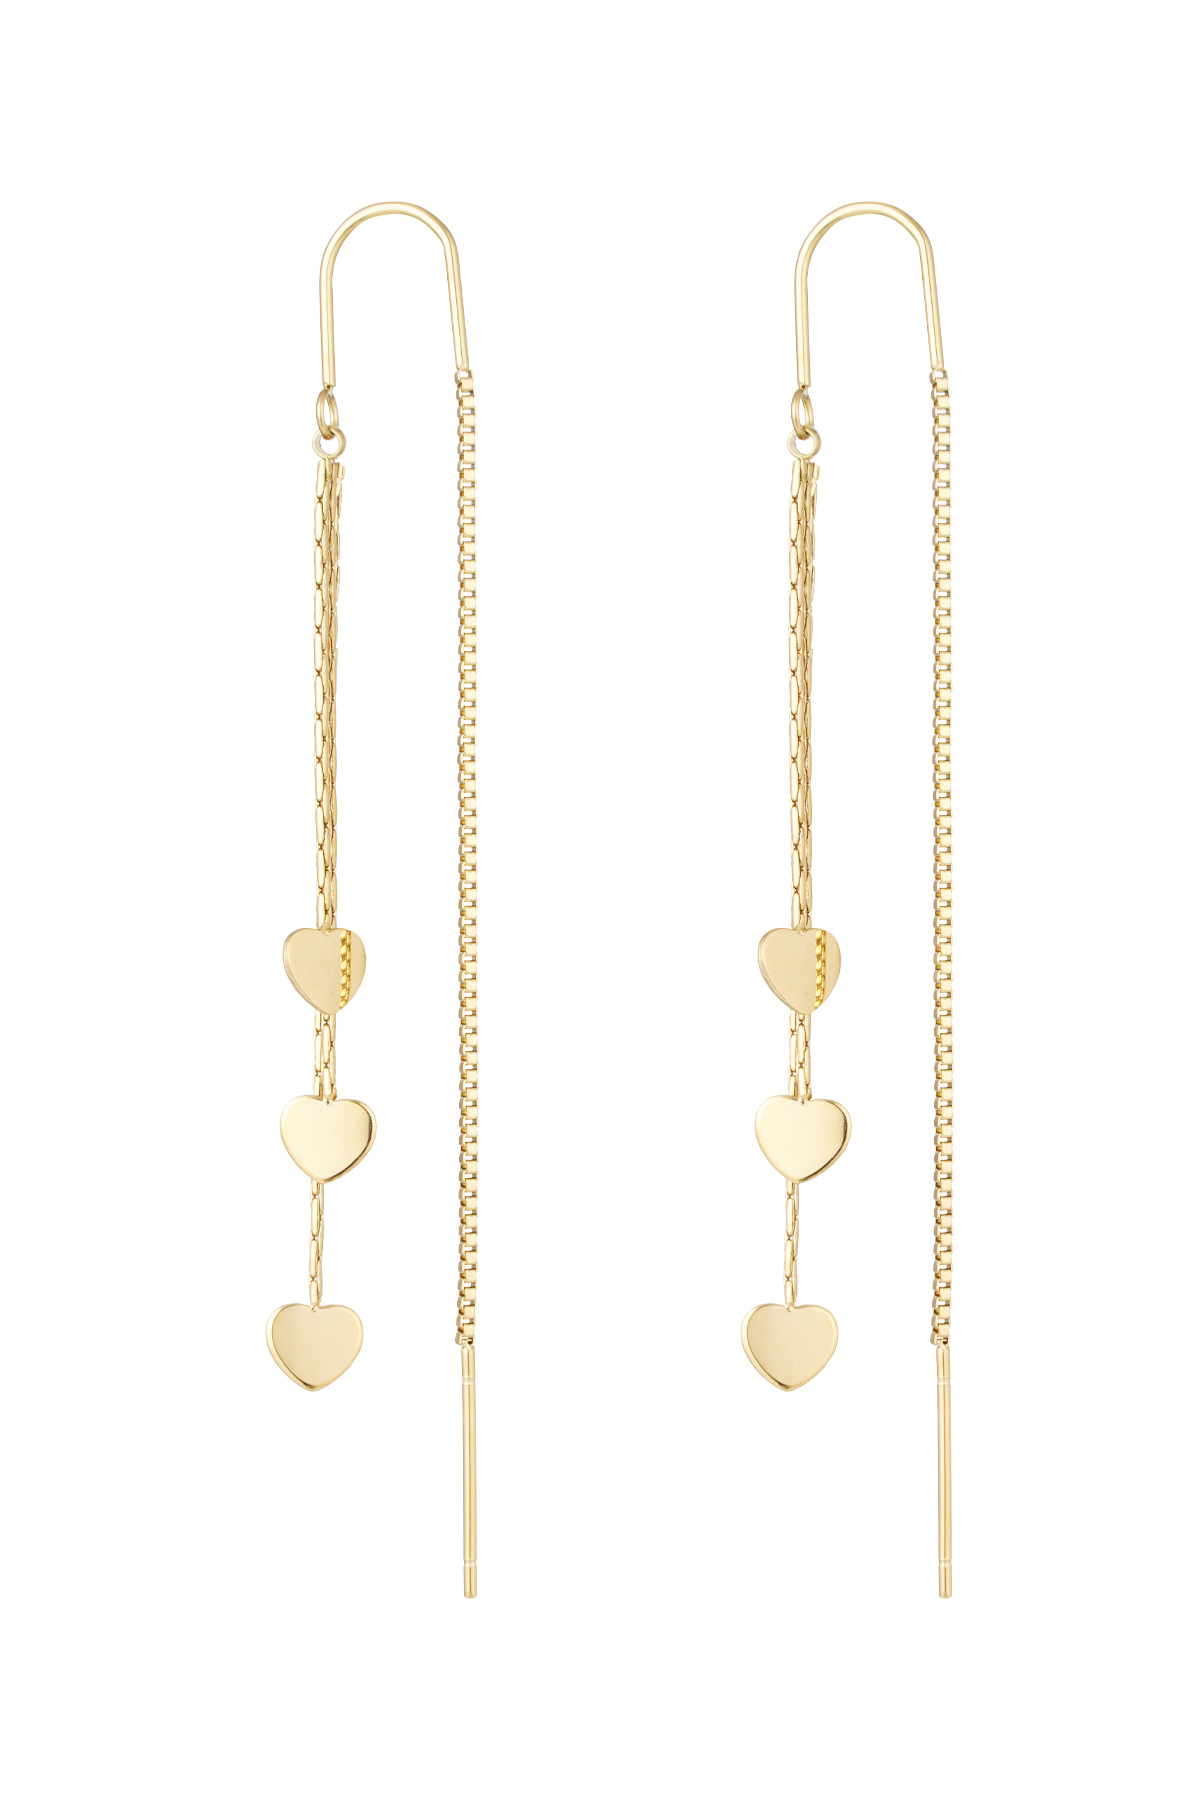 Hanging earrings 3 x hearts - gold h5 